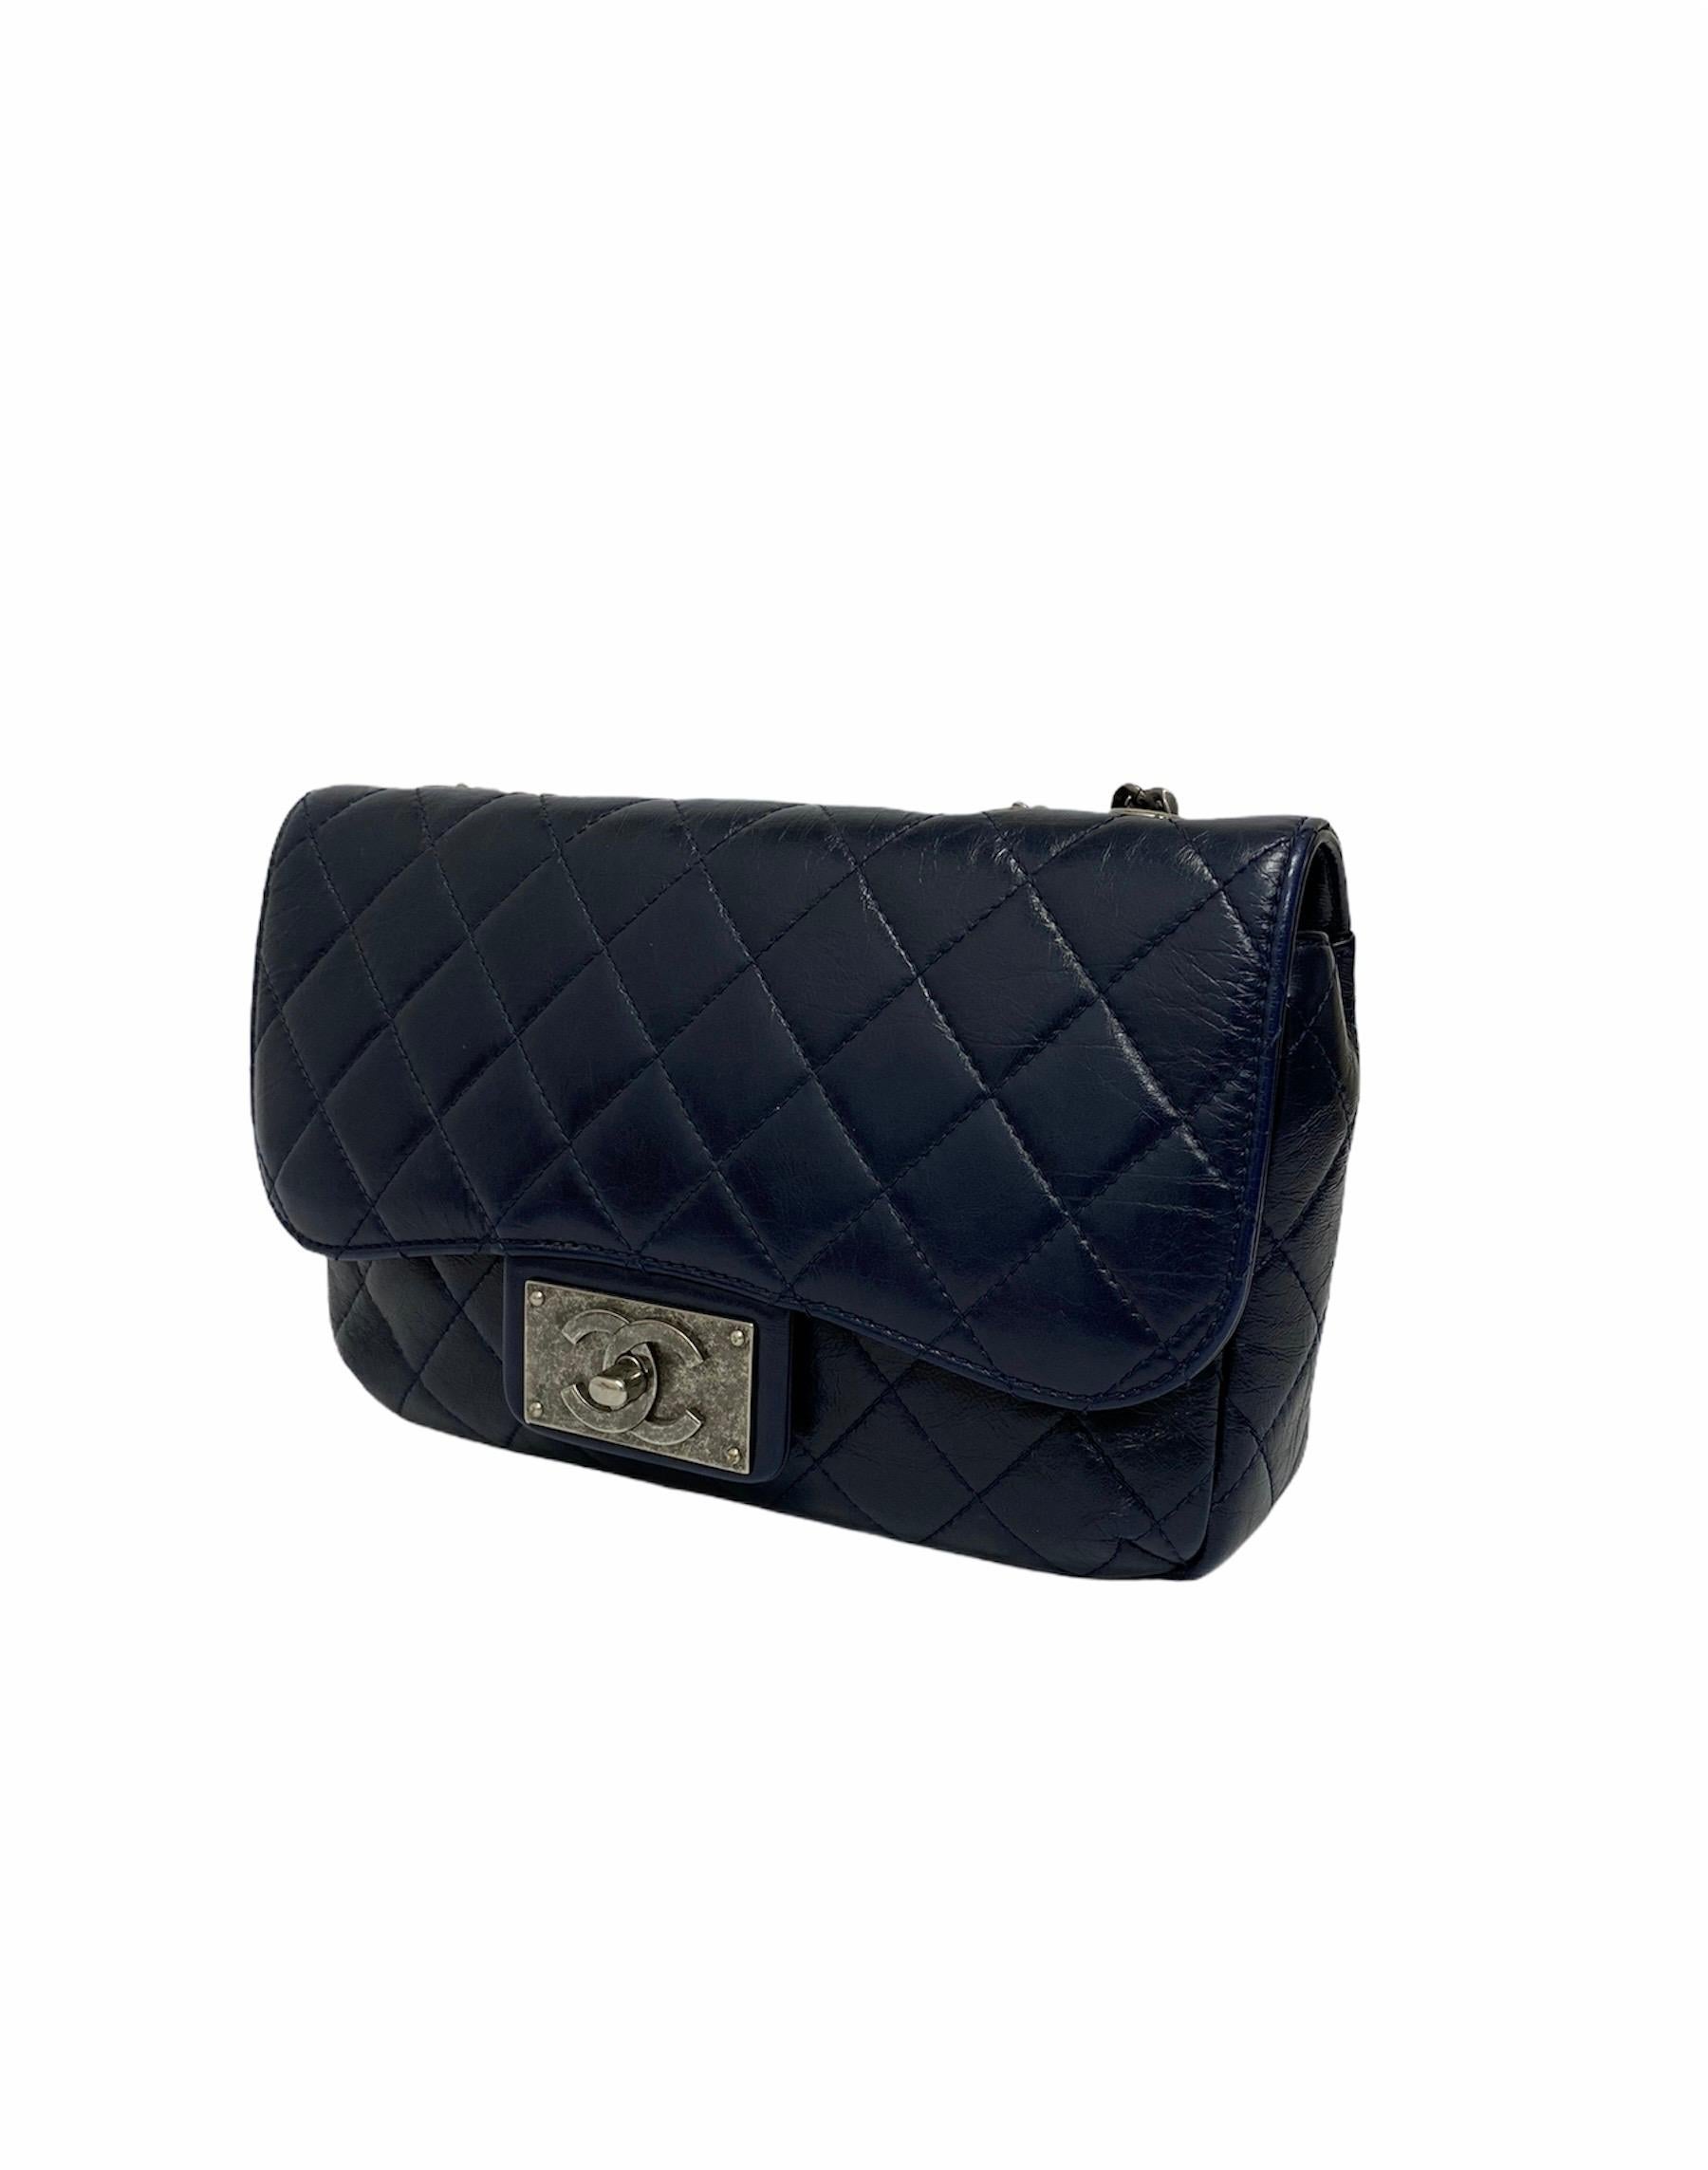 Black Chanel Blue Bag in Leather with Silver Hardware